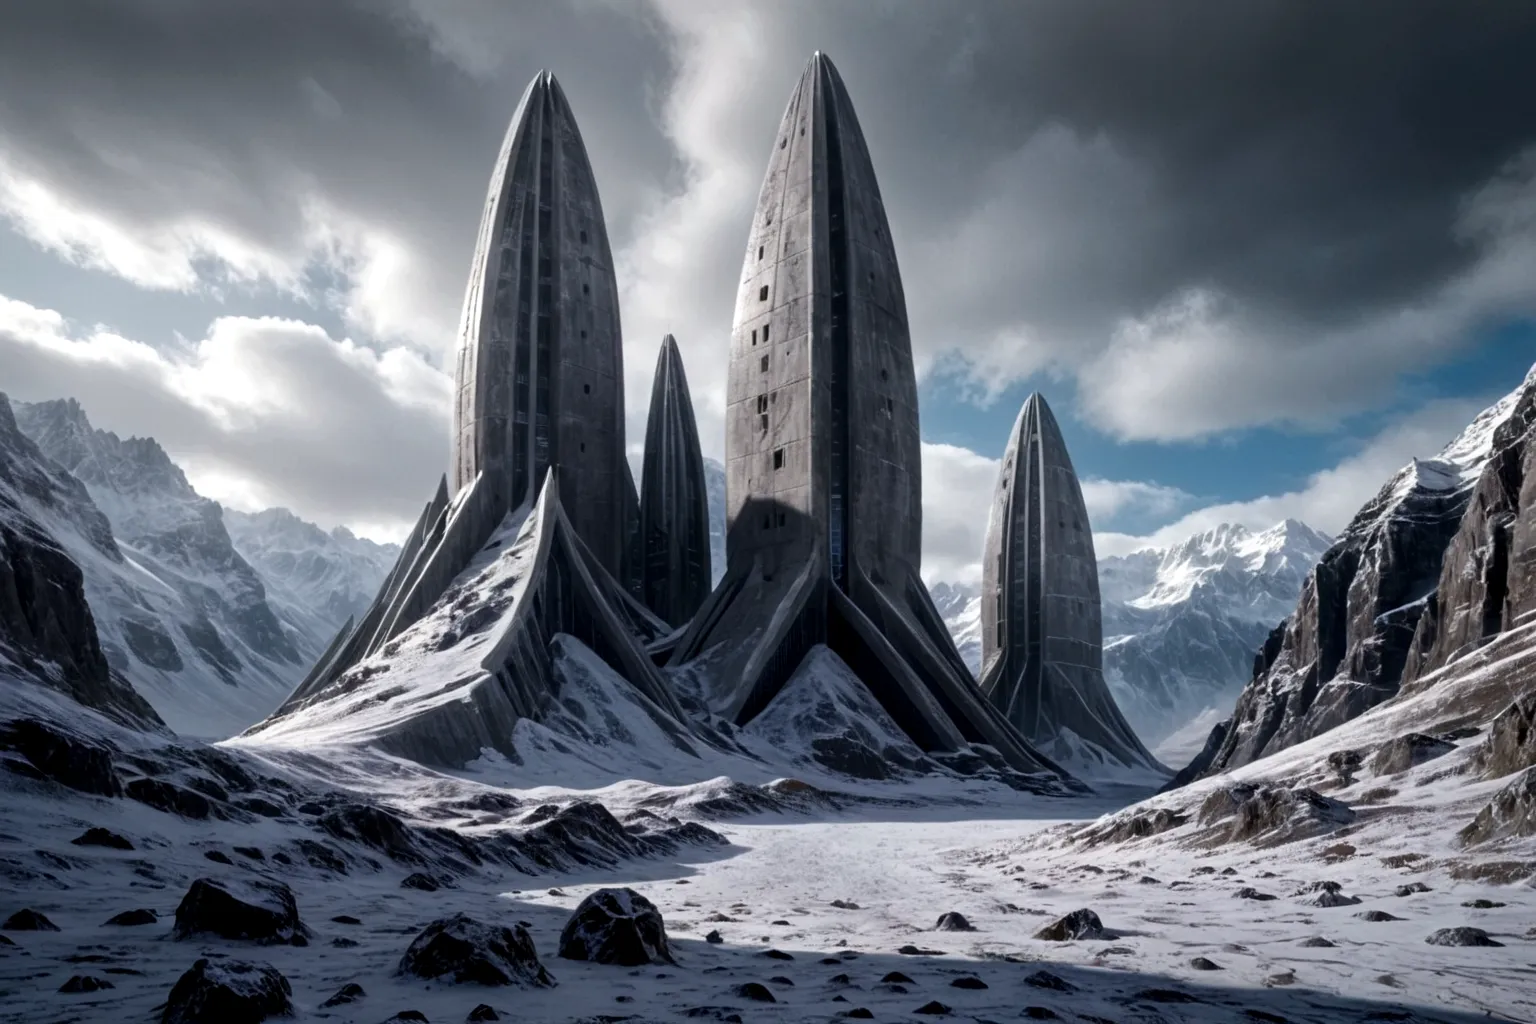 futuristic concrete fortress ON AN ALIEN PLANET STEEP AND INTRINSIC MOUNTAINS WITH SHARP ROCKS WITH SNOW AND ICE, EL CIELO TORME...